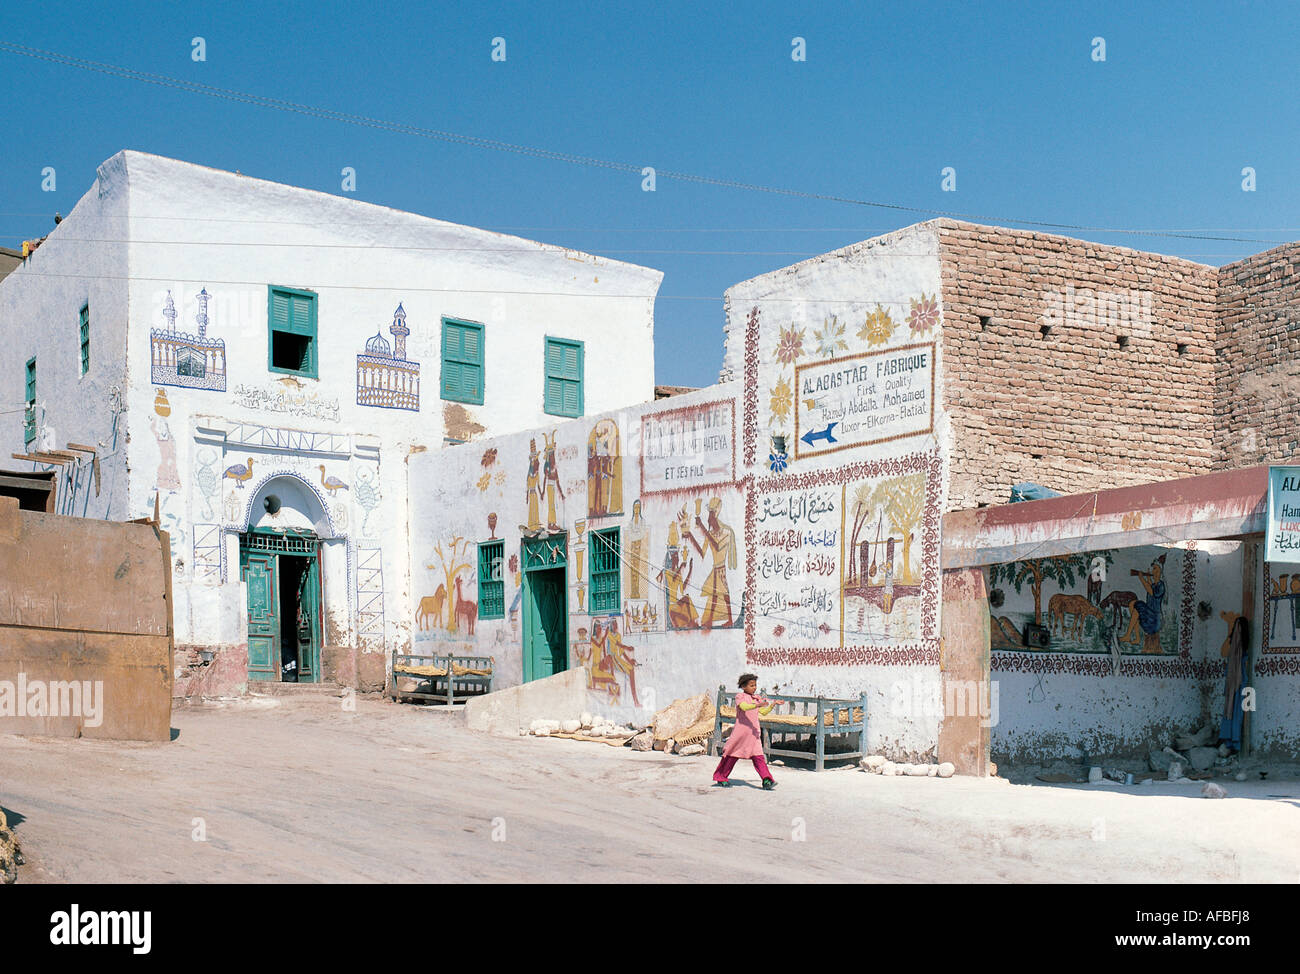 A girl walking past the Alabaster Factory in a village of painted Arab houses near the Valley of the Kings Egypt Stock Photo